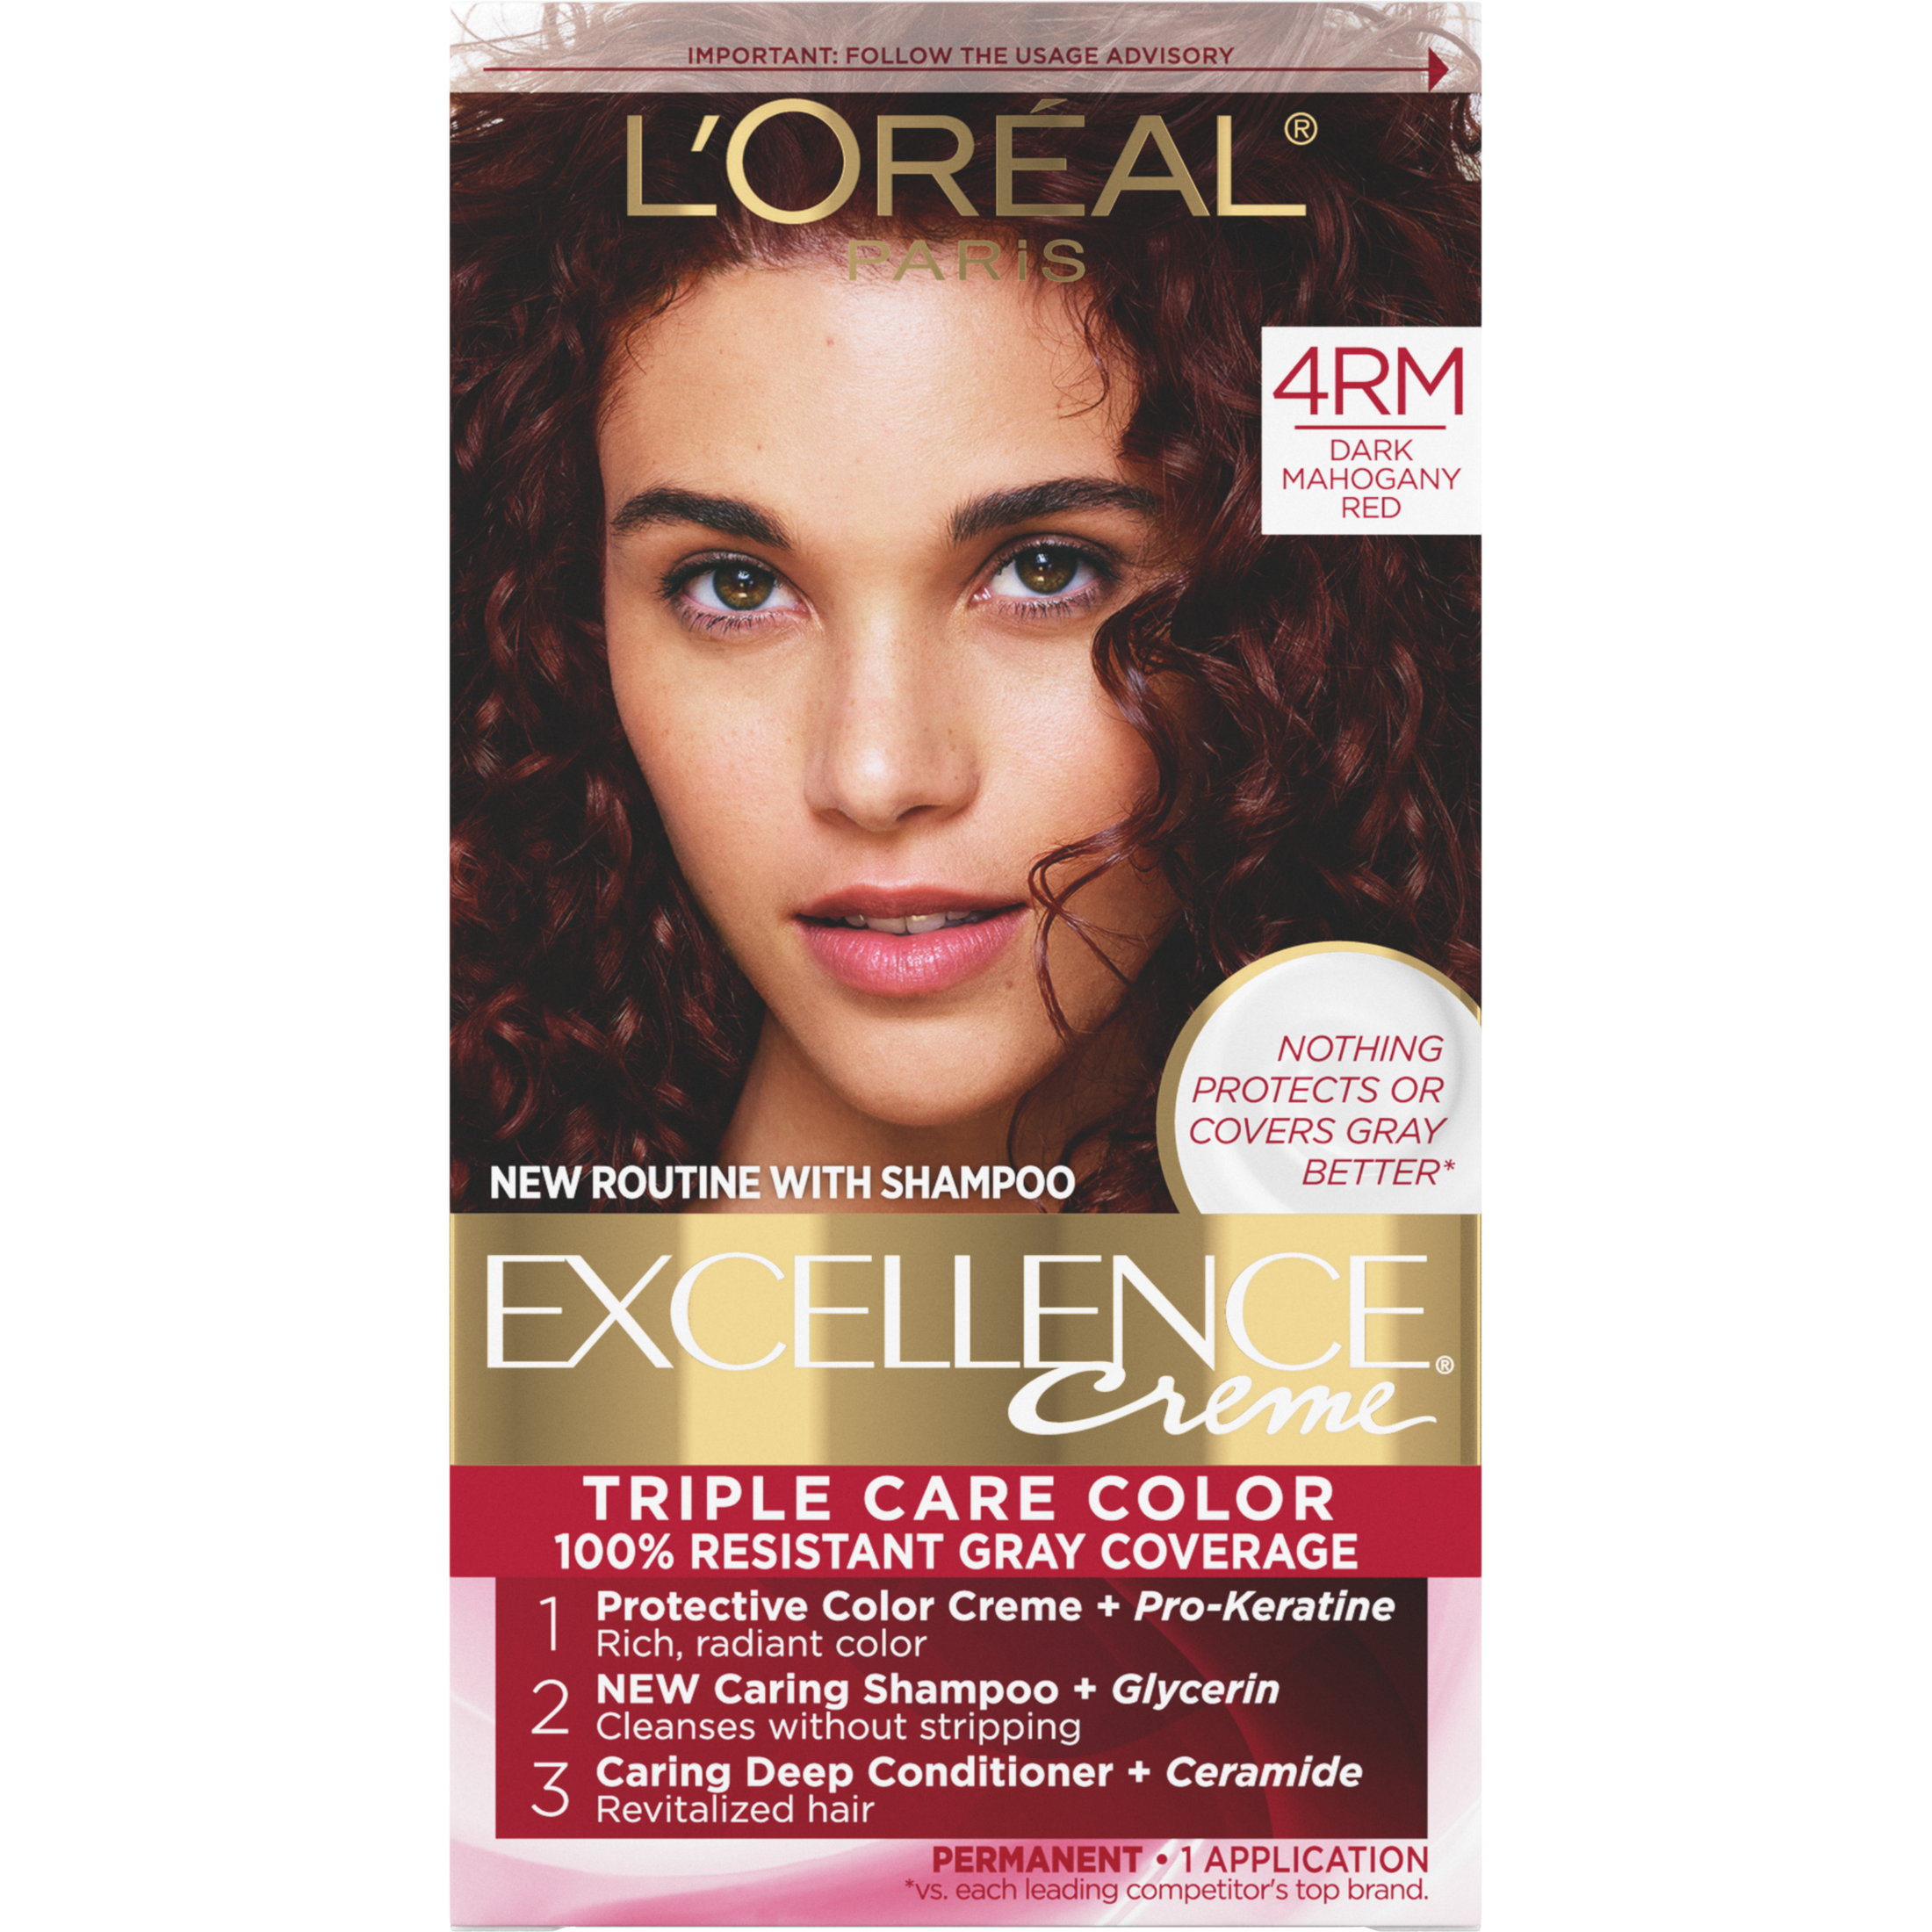 L'Oreal Paris Excellence Creme Permanent Hair Color, 4RM Dark Mahogany Red - image 1 of 10